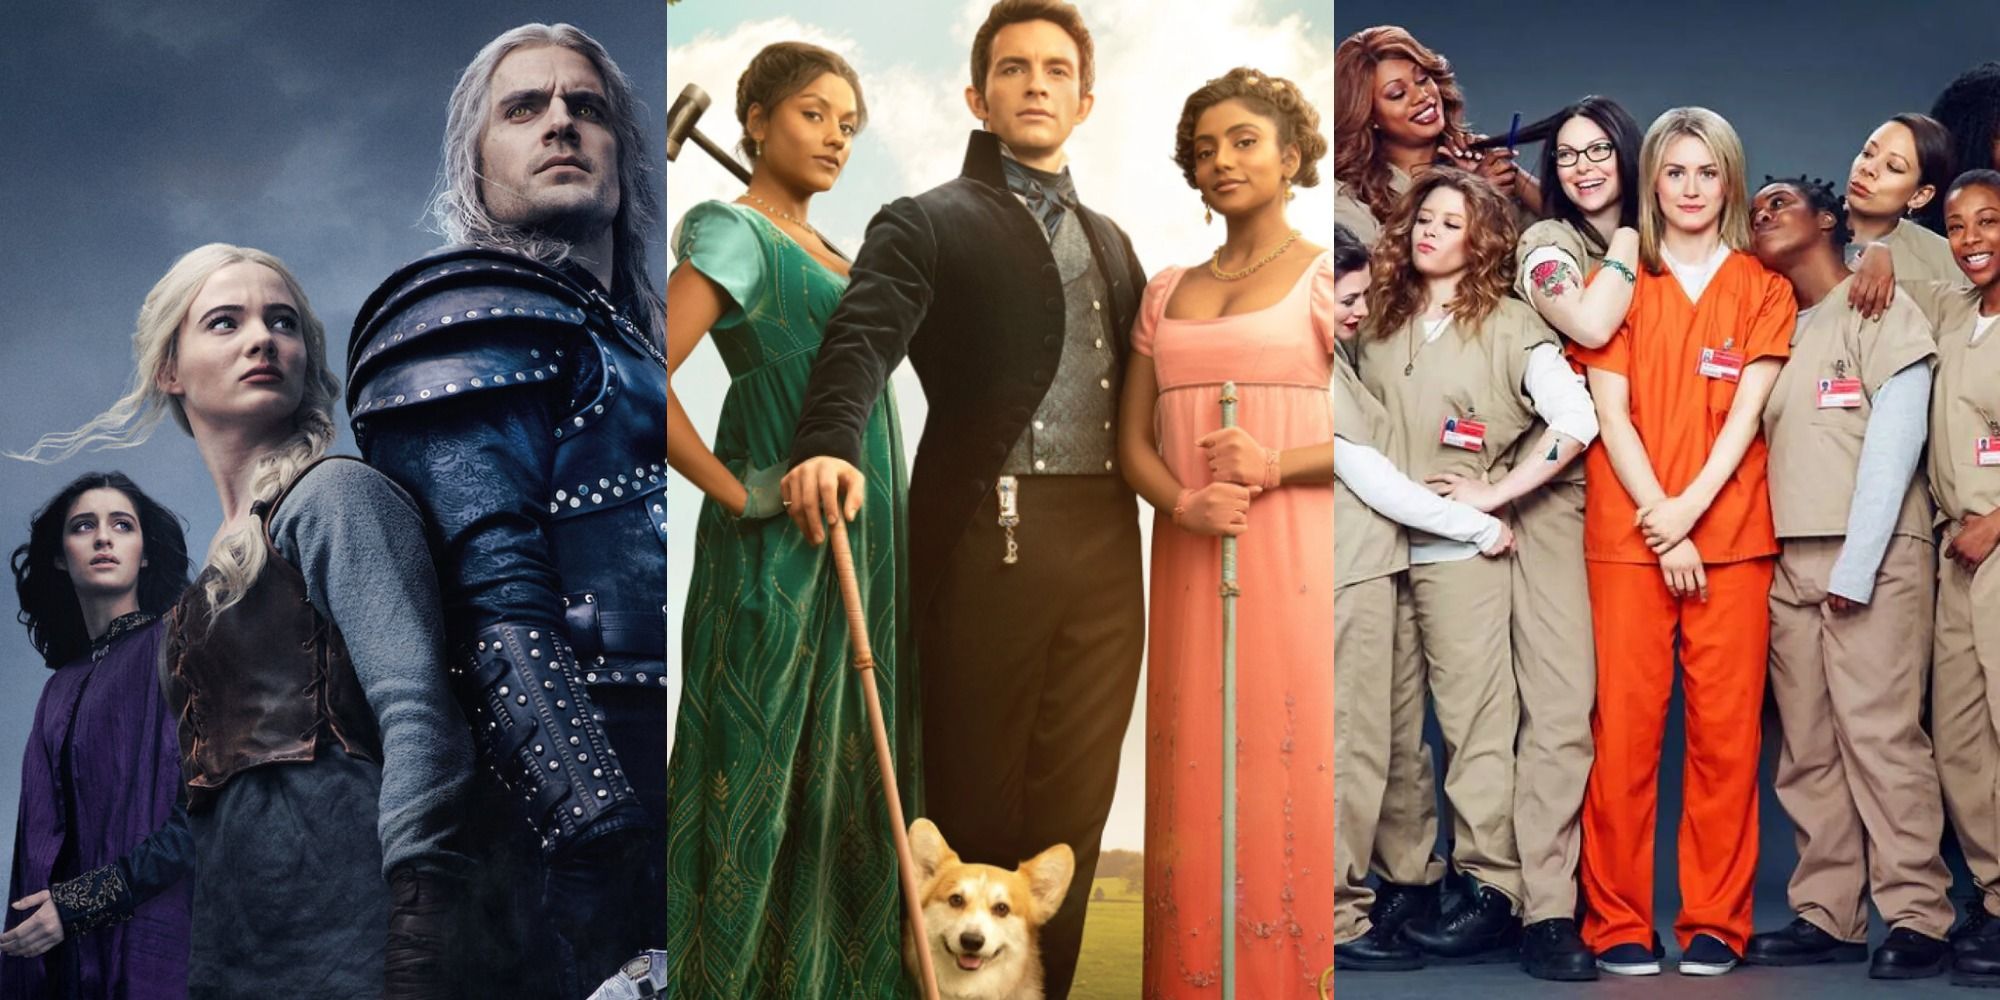 The cast of The Witcher, Bridgerton, and Orange is the New Black